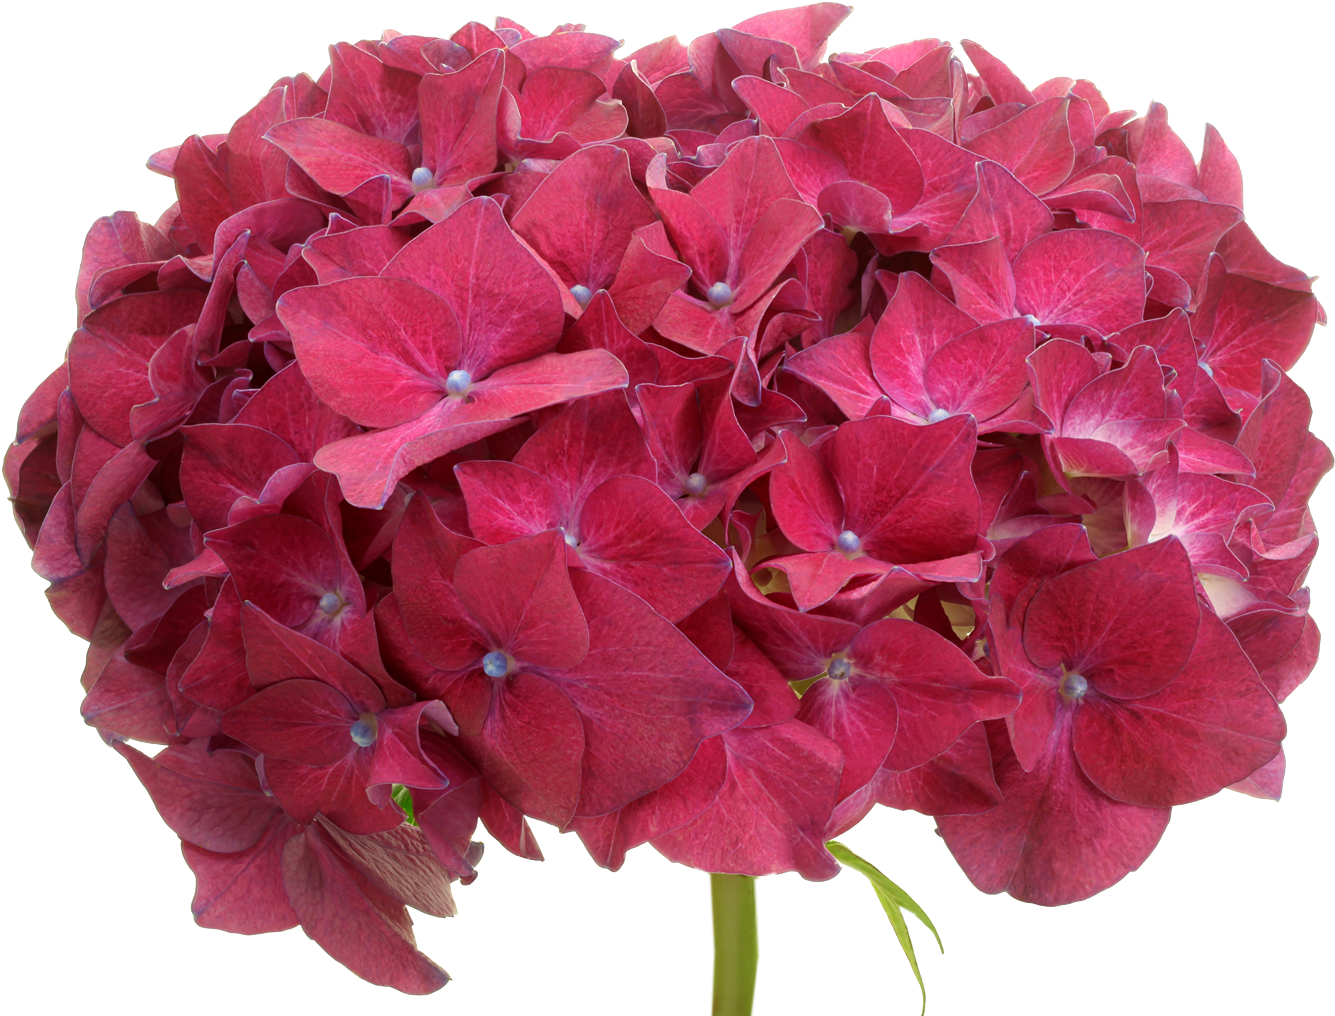 Vibrant Pink Hydrangea Bloom PNG image